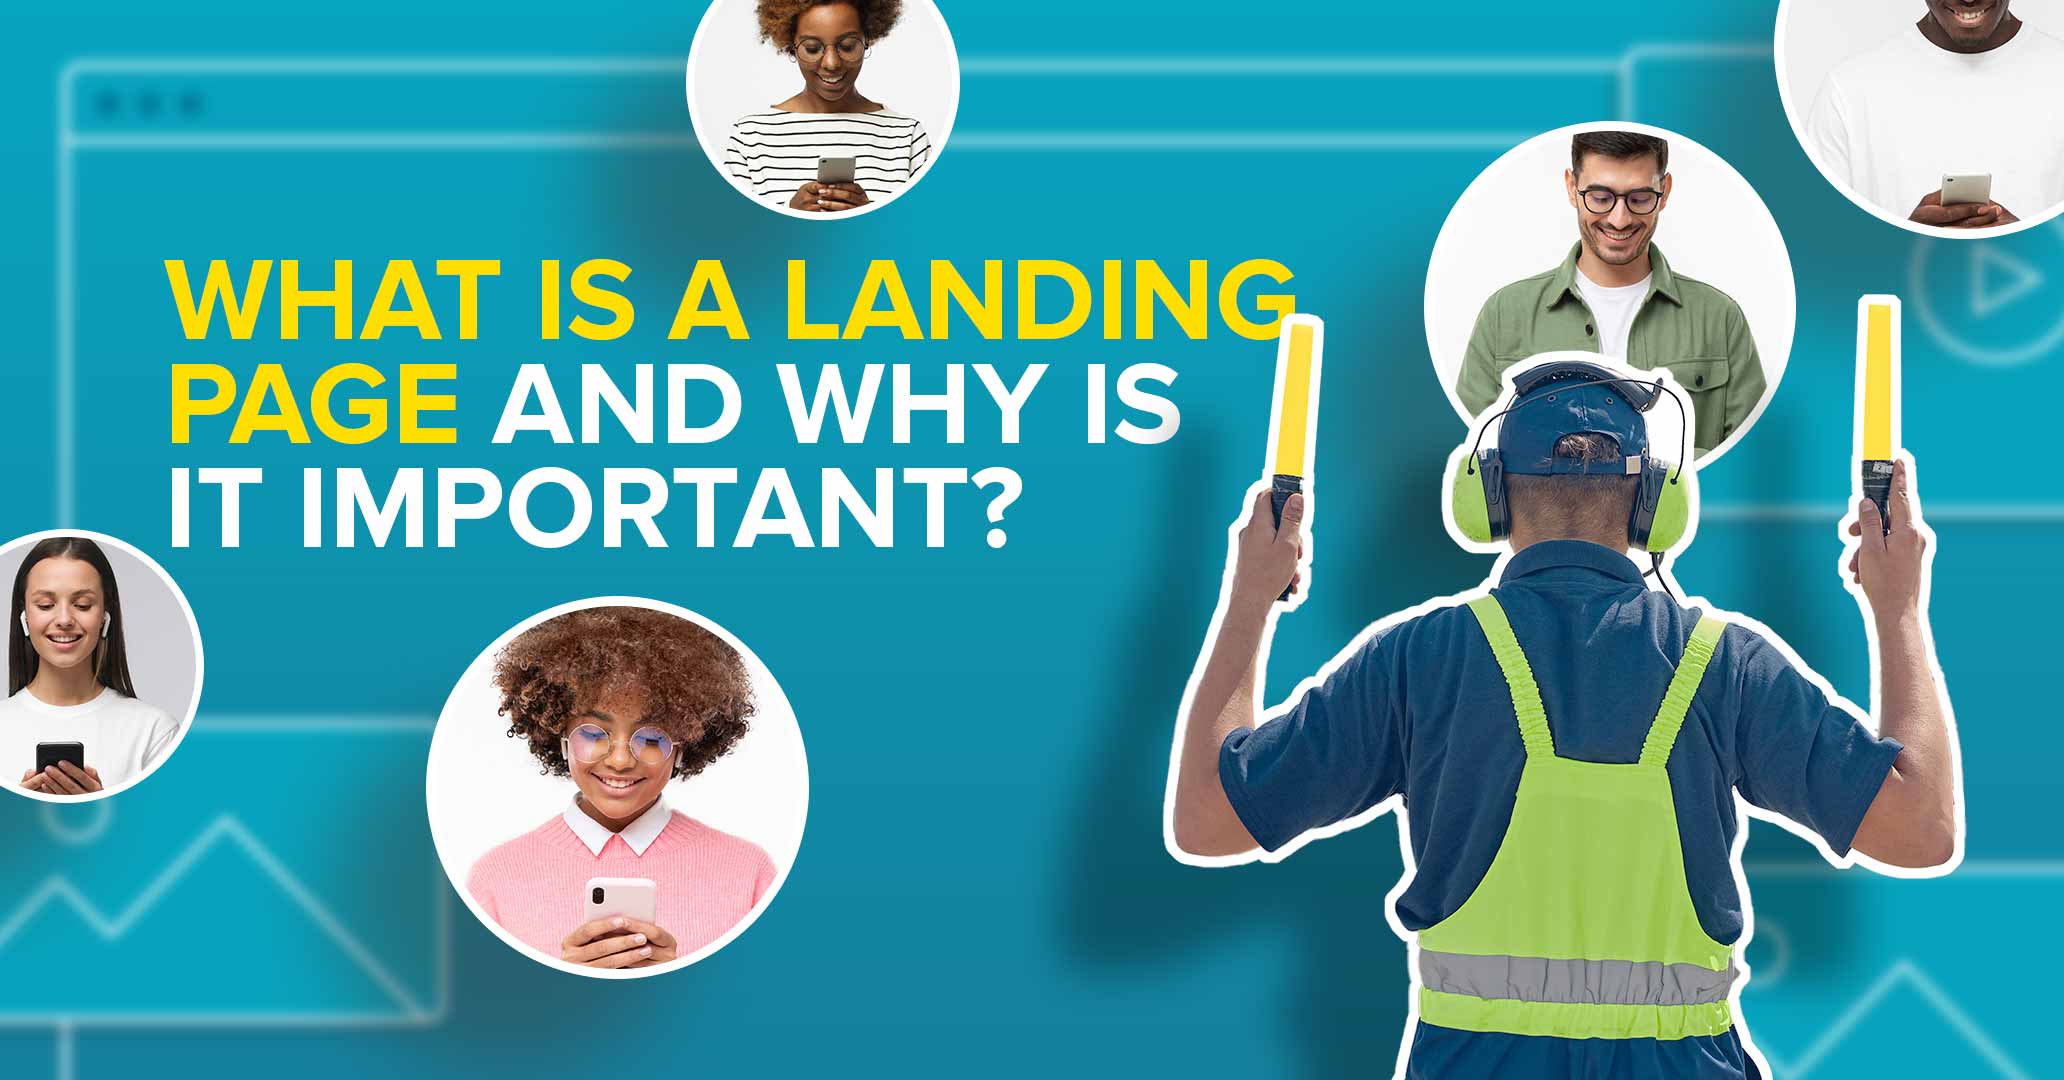 What is a landing page and why is it important?